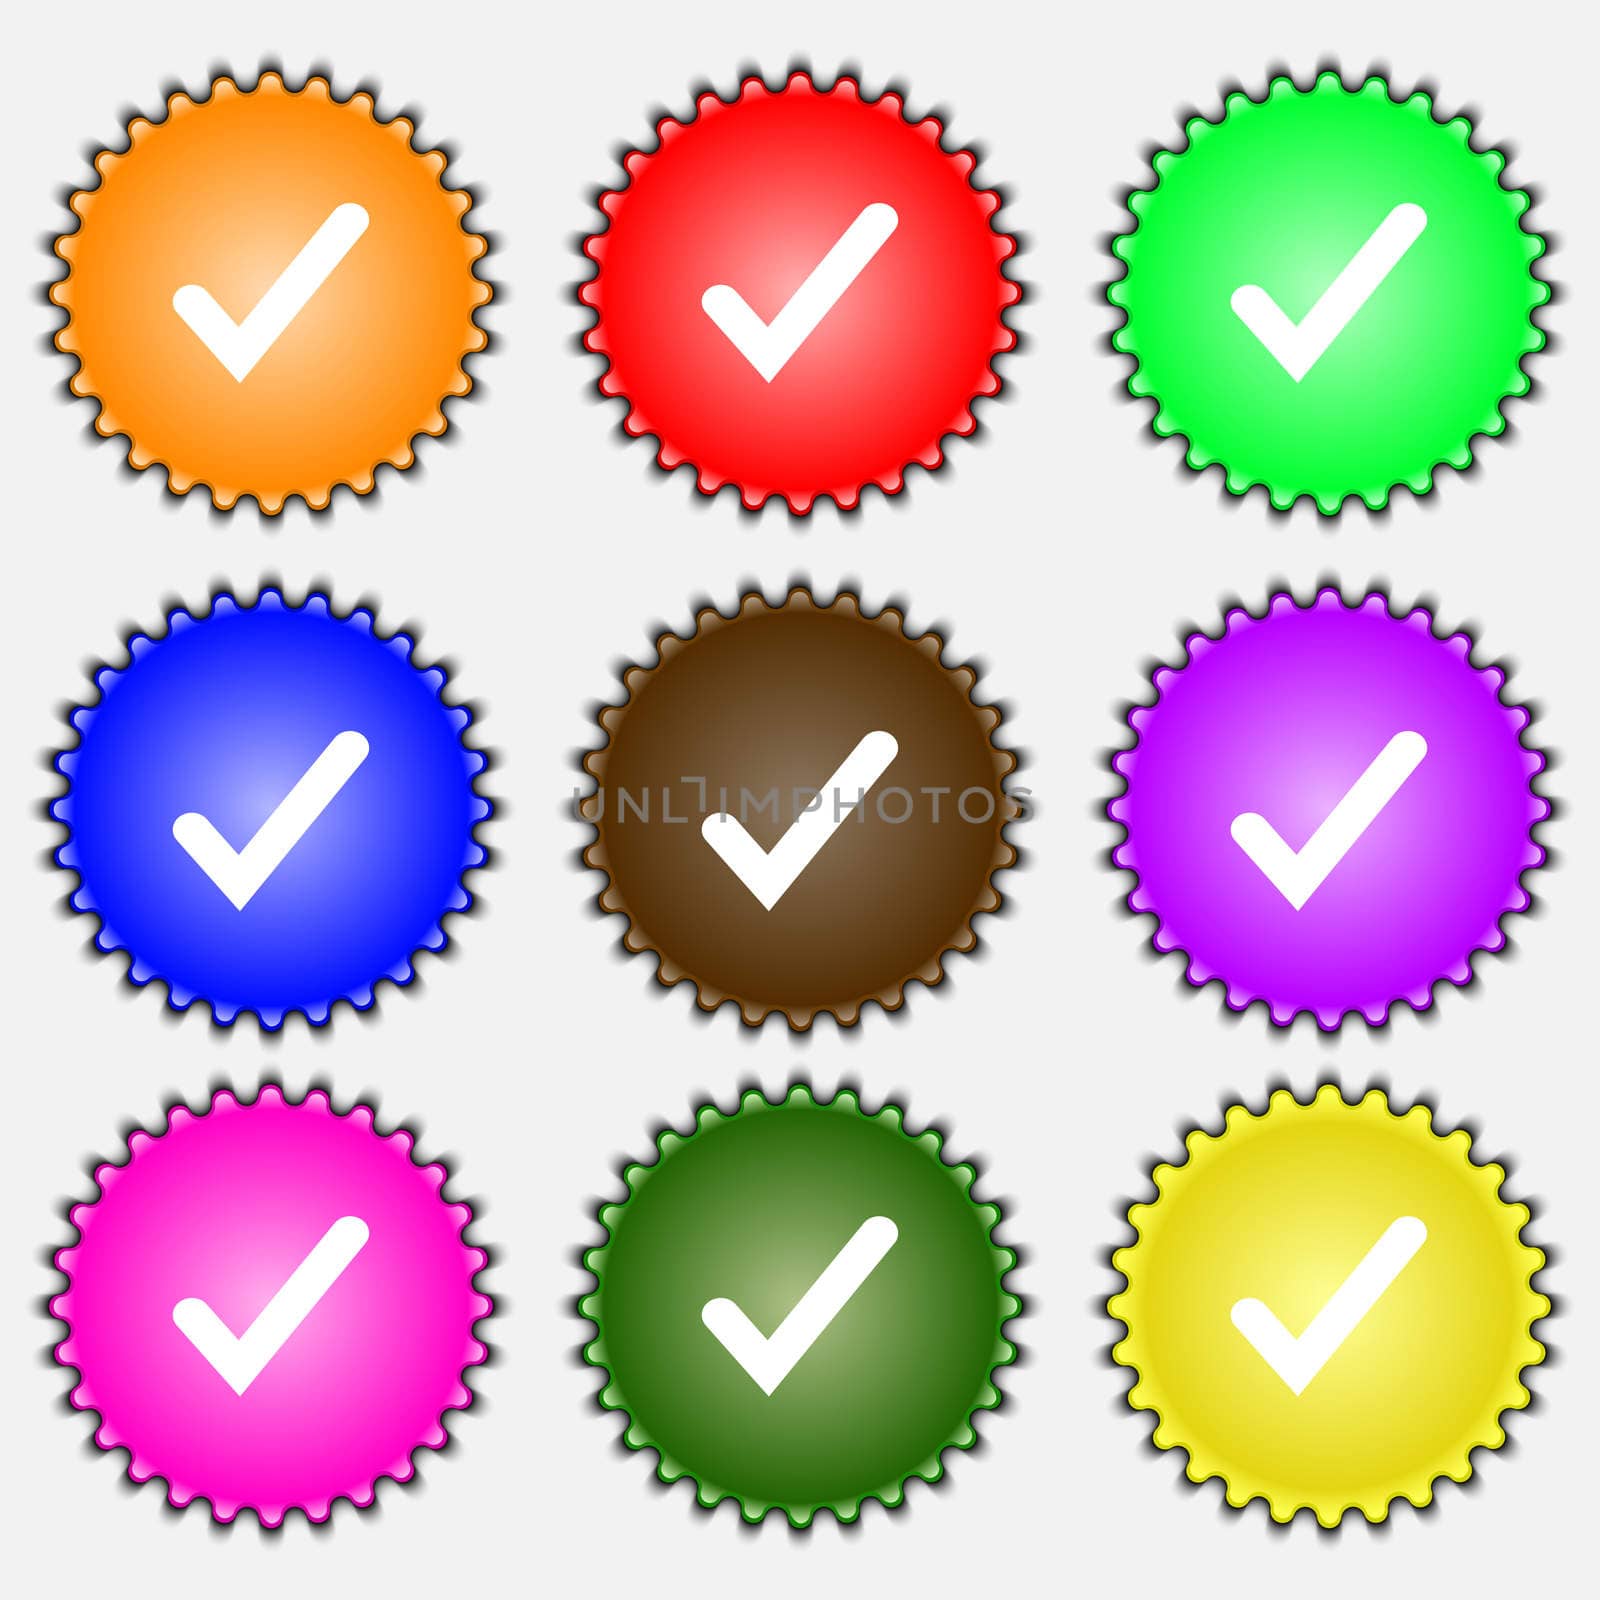 Check mark, tik icon sign. A set of nine different colored labels. illustration 